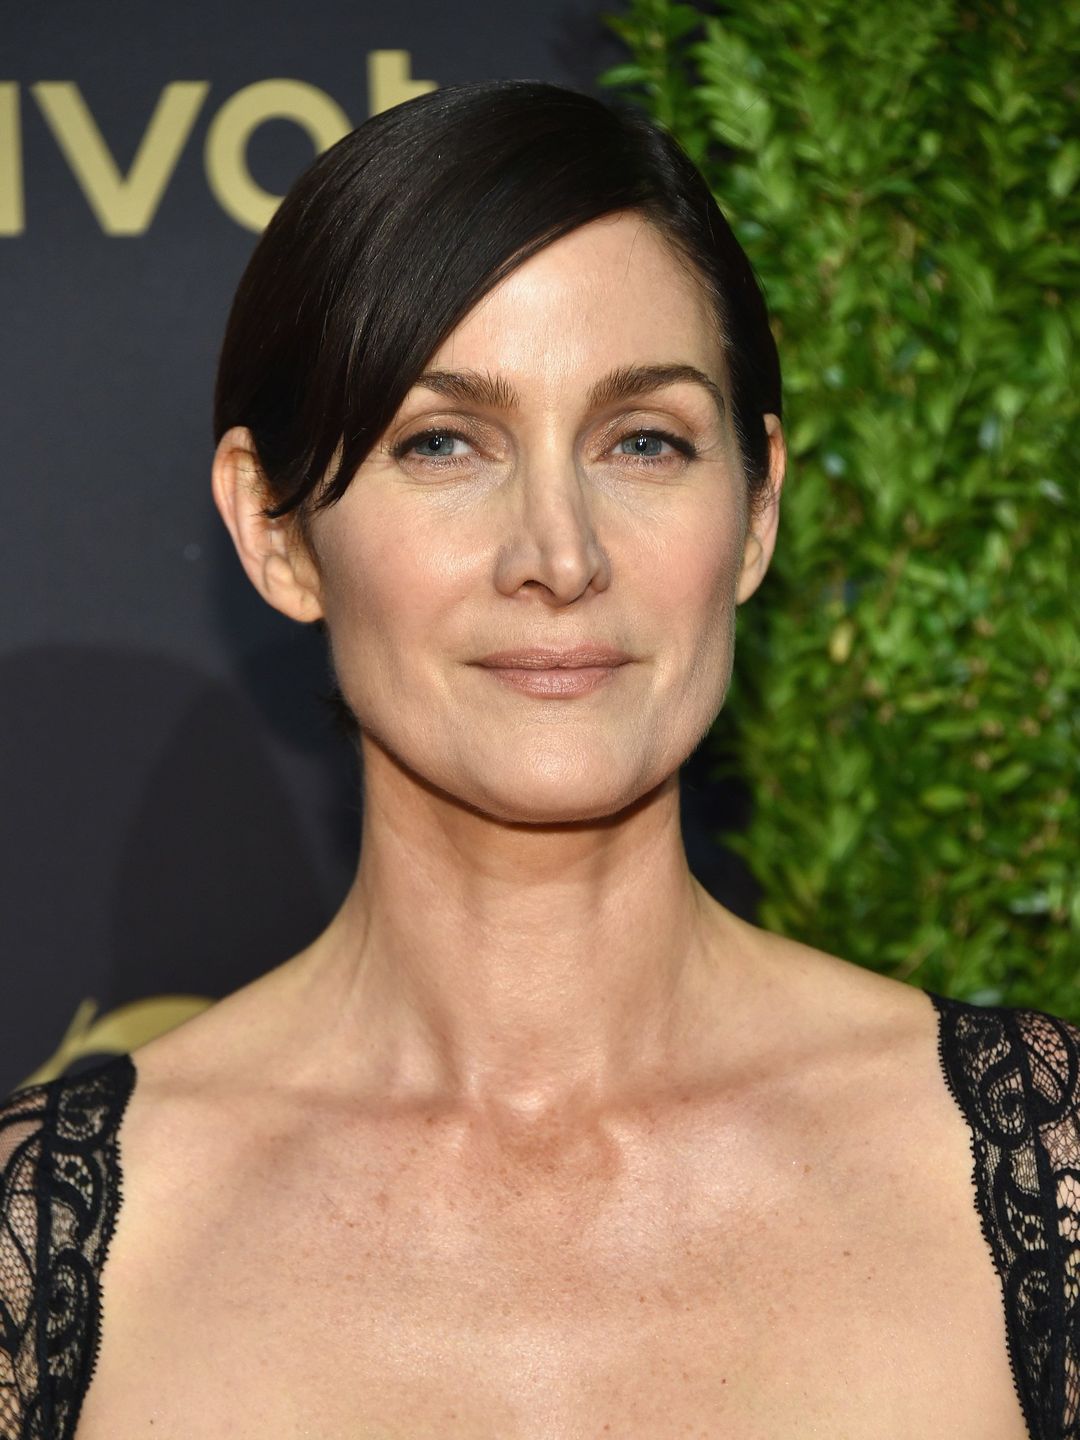 Carrie-Anne Moss who is her father